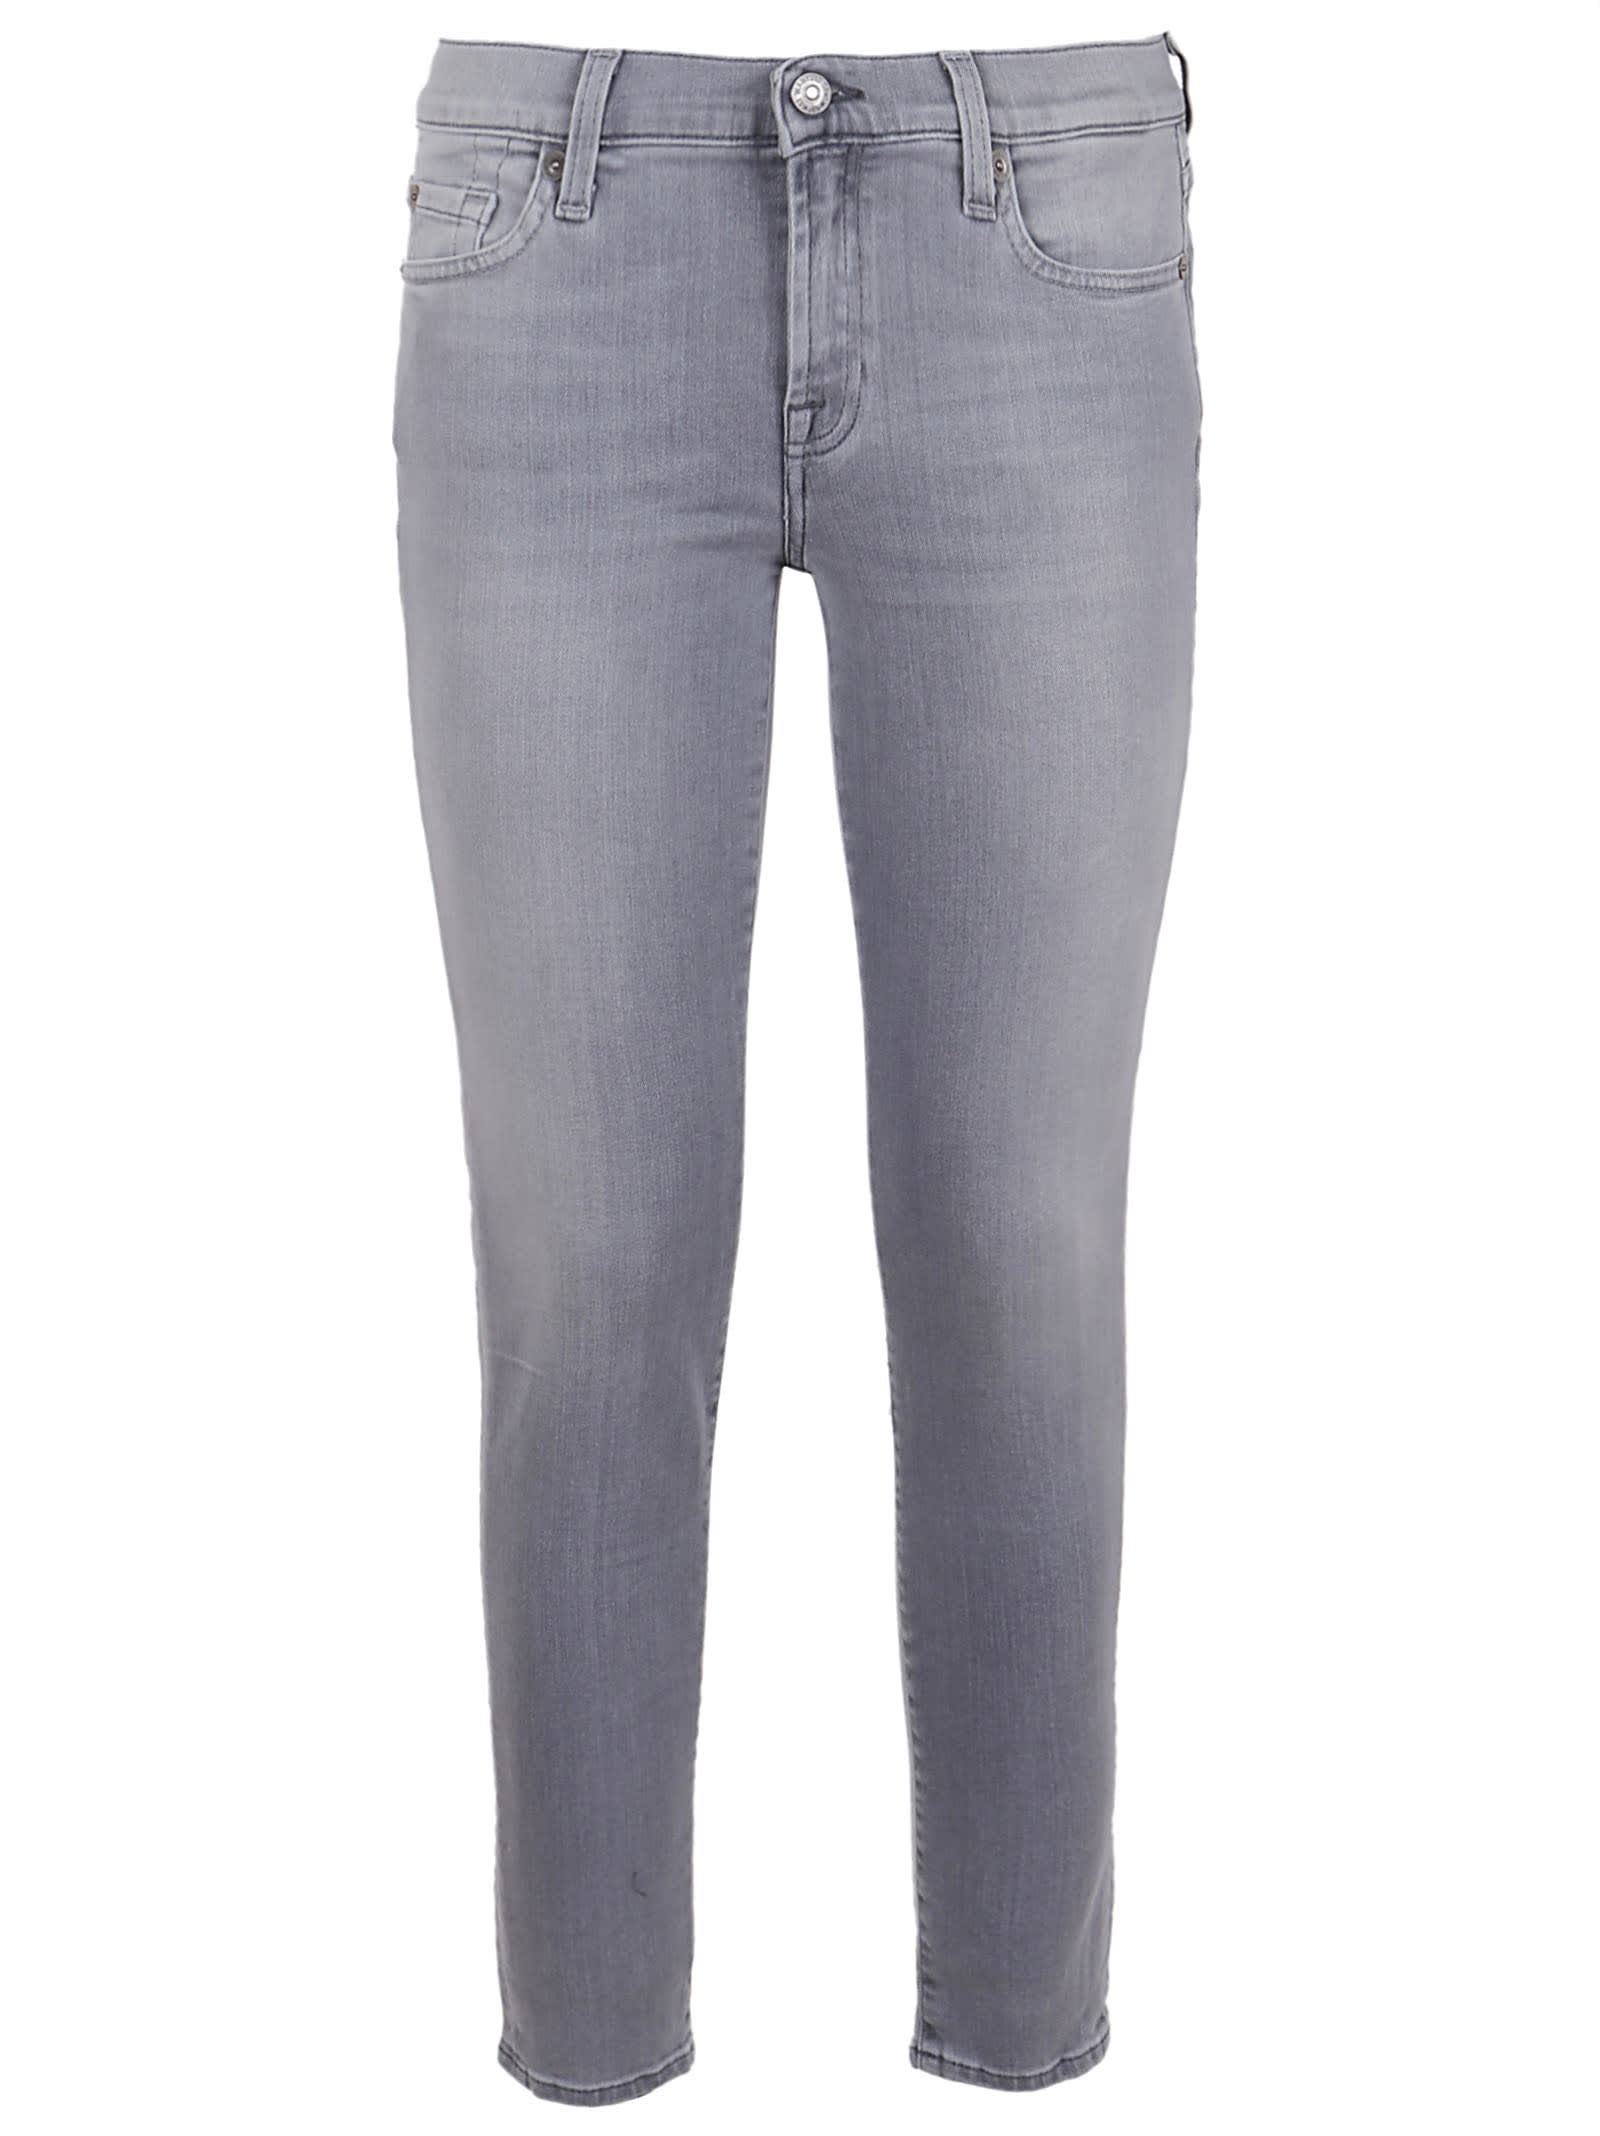 7 For All Mankind The Skinny Slim Illusion In Grey